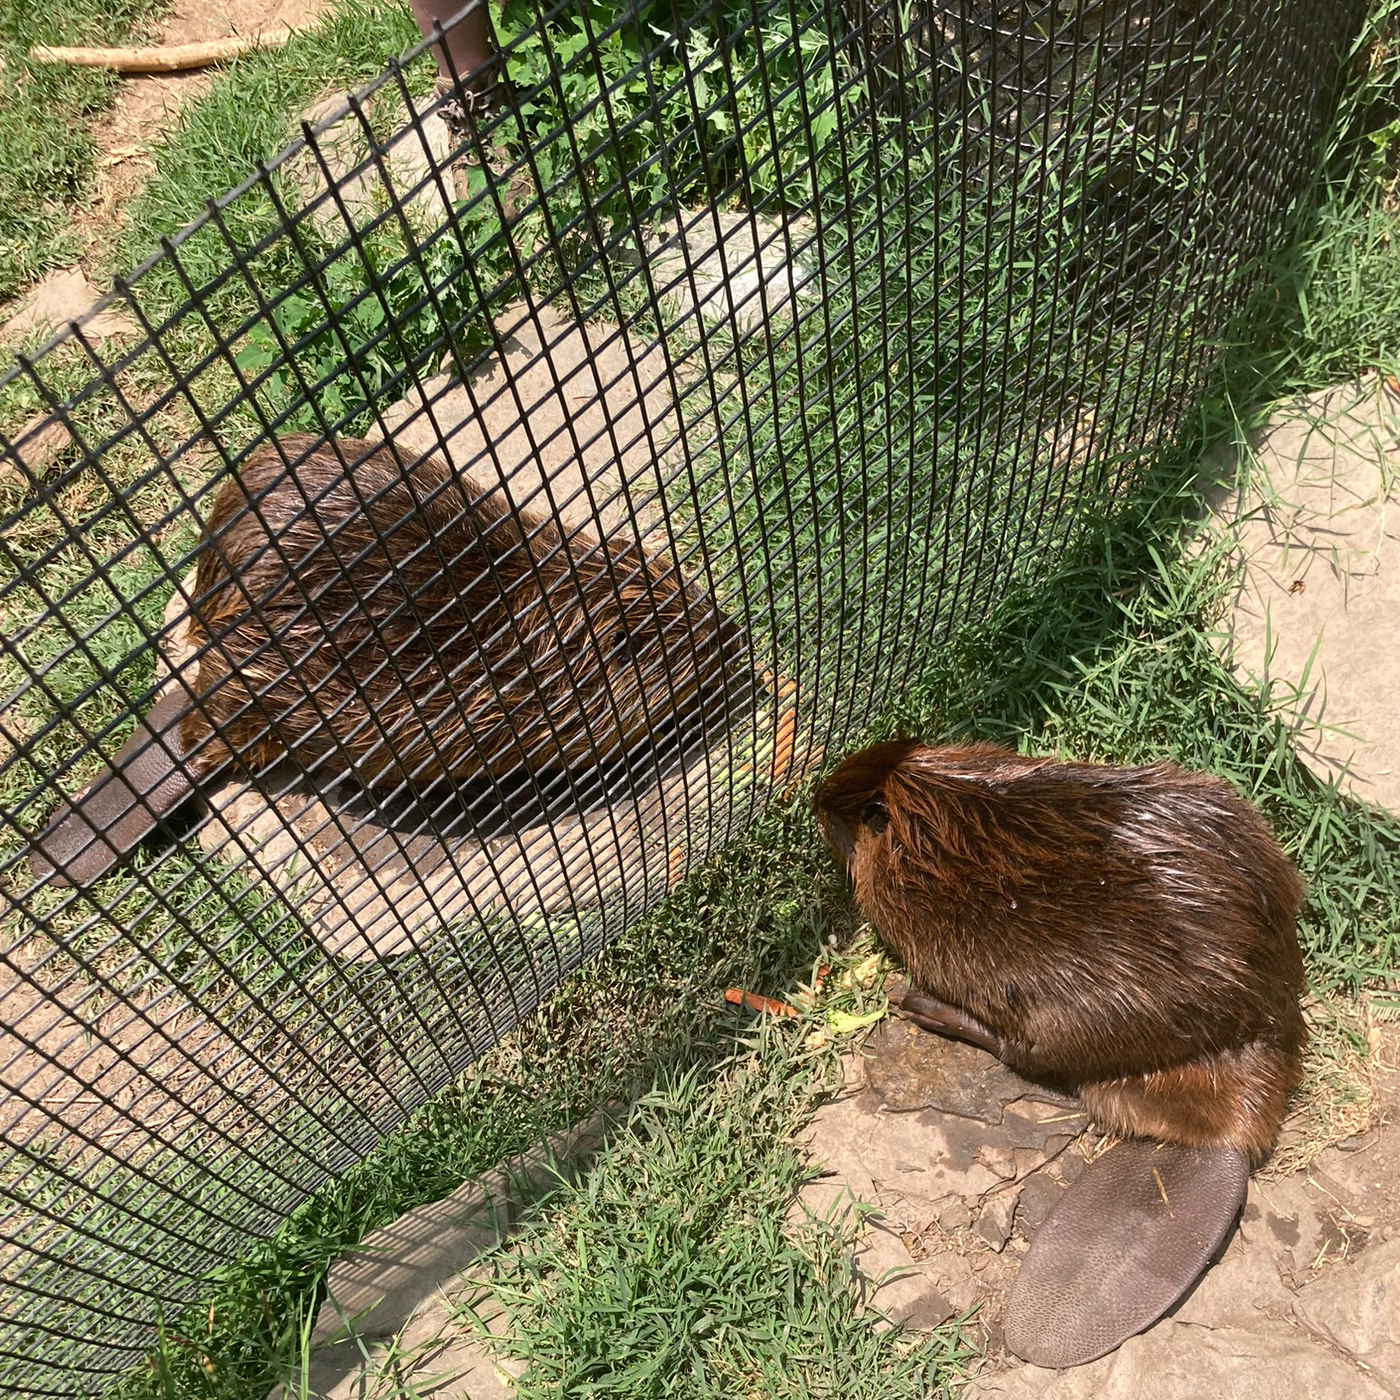 Two beavers, Aspen and Juniper, look at each other through a mesh barrier.